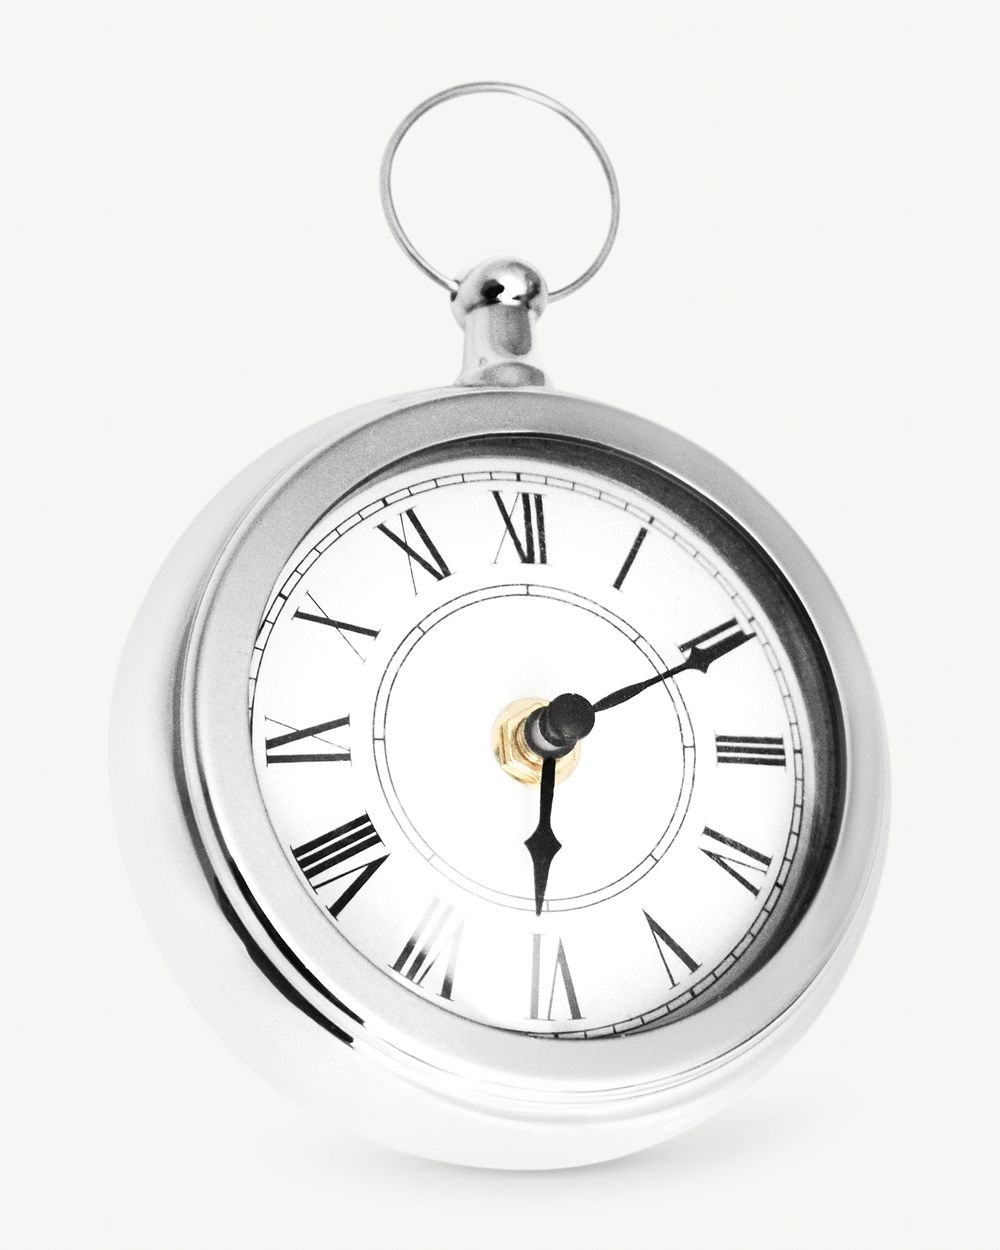 Pocket watch, isolated object on white